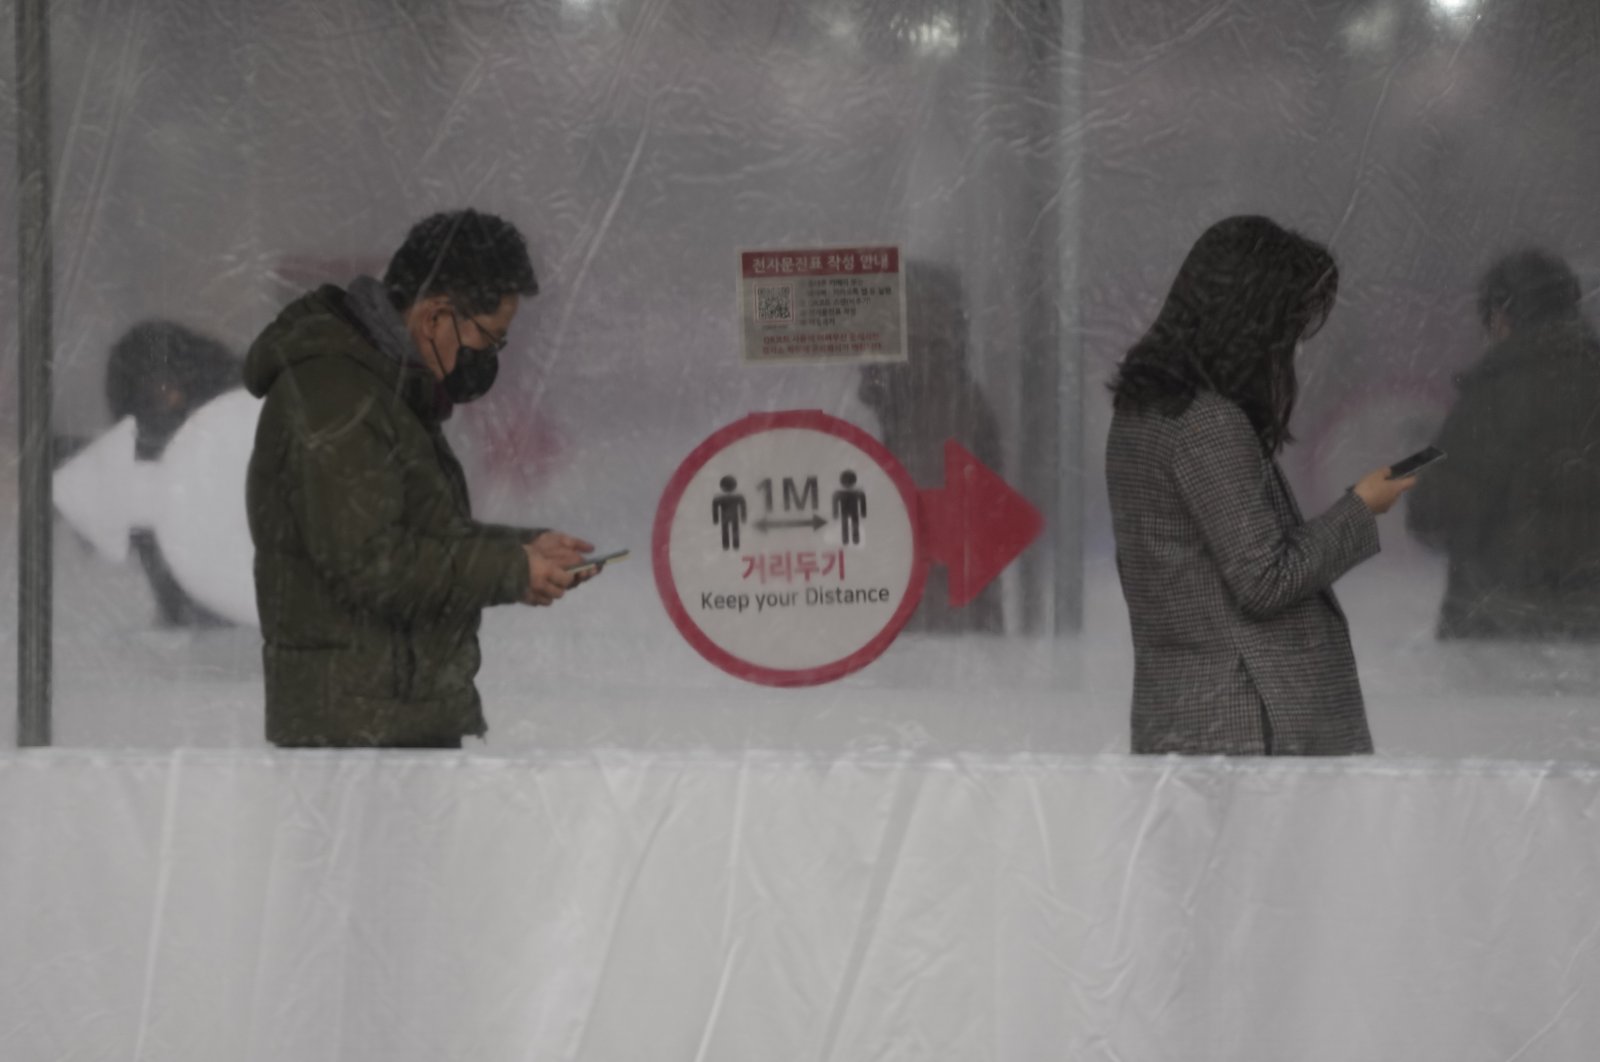 People queue in line for a COVID-19 test while maintaining social distancing at a temporary screening clinic for the coronavirus in Seoul, South Korea, Jan. 25, 2022. (AP Photo)